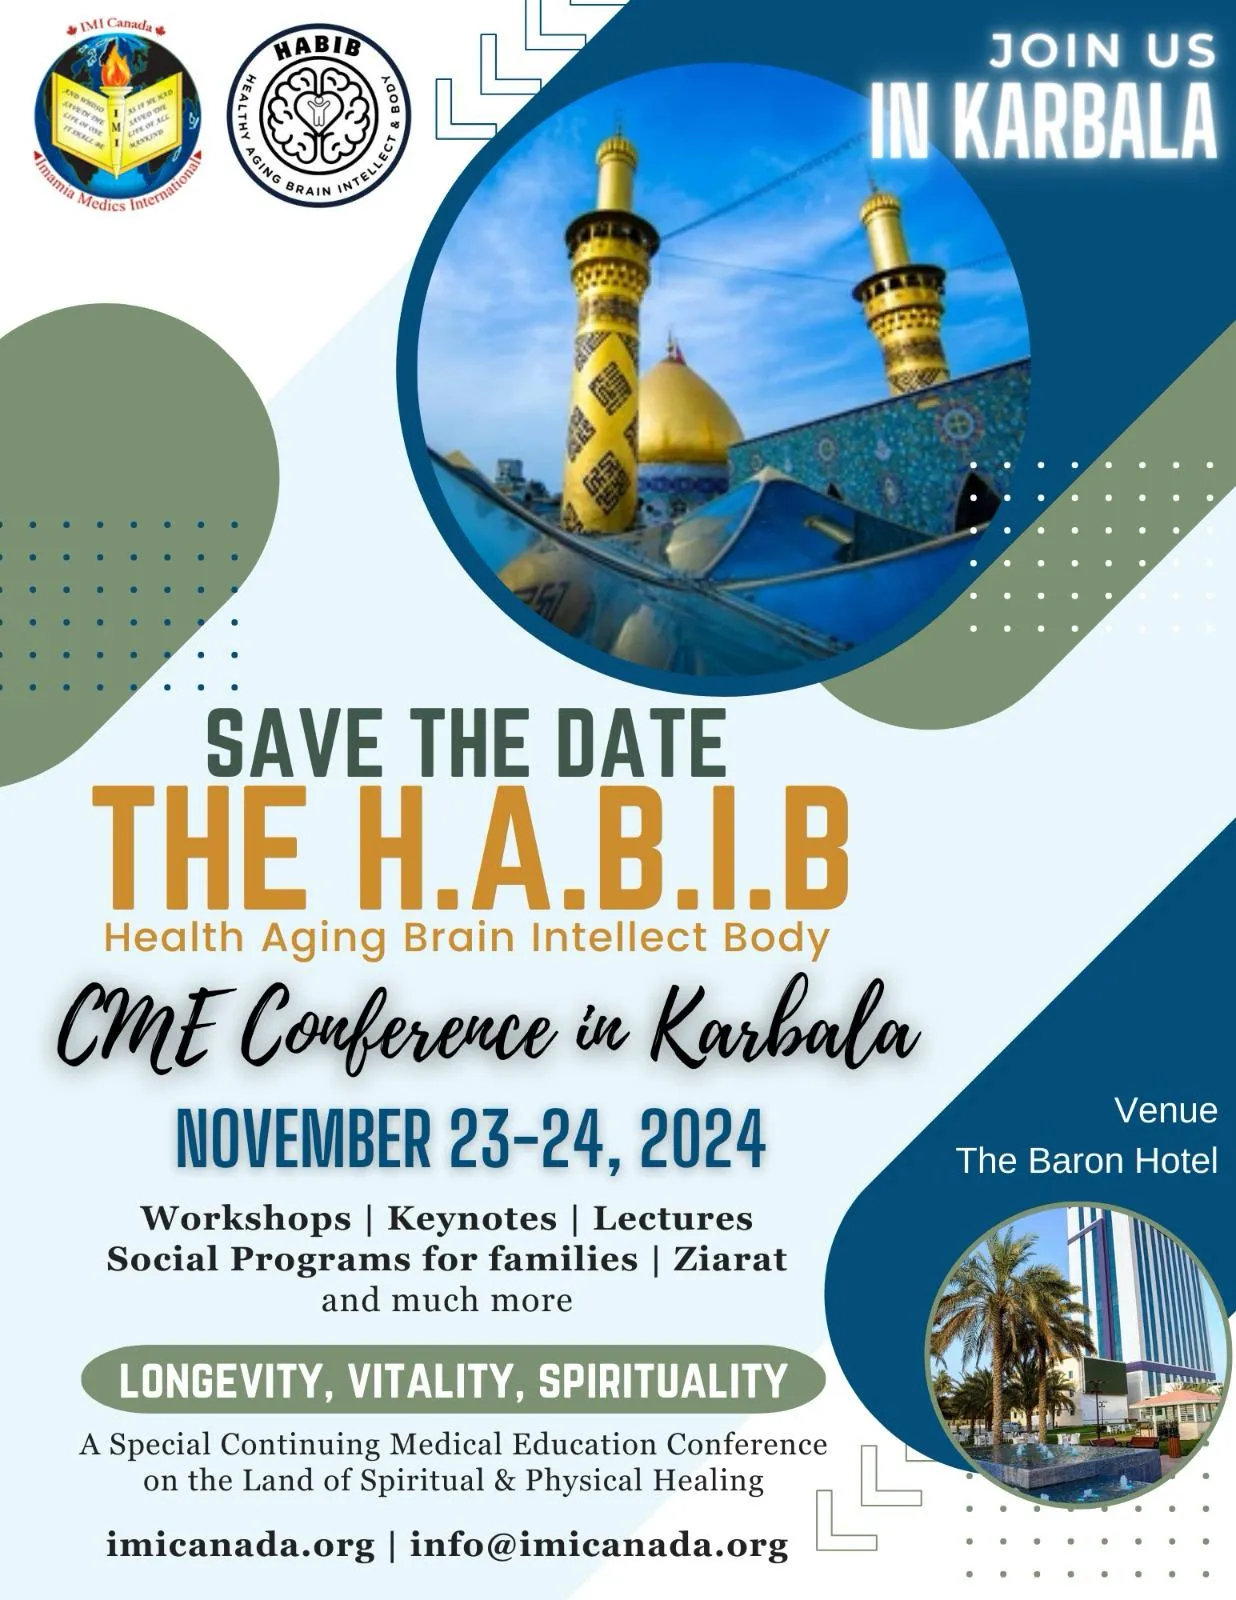 2024 H.A.B.I.B CME Conference Poster